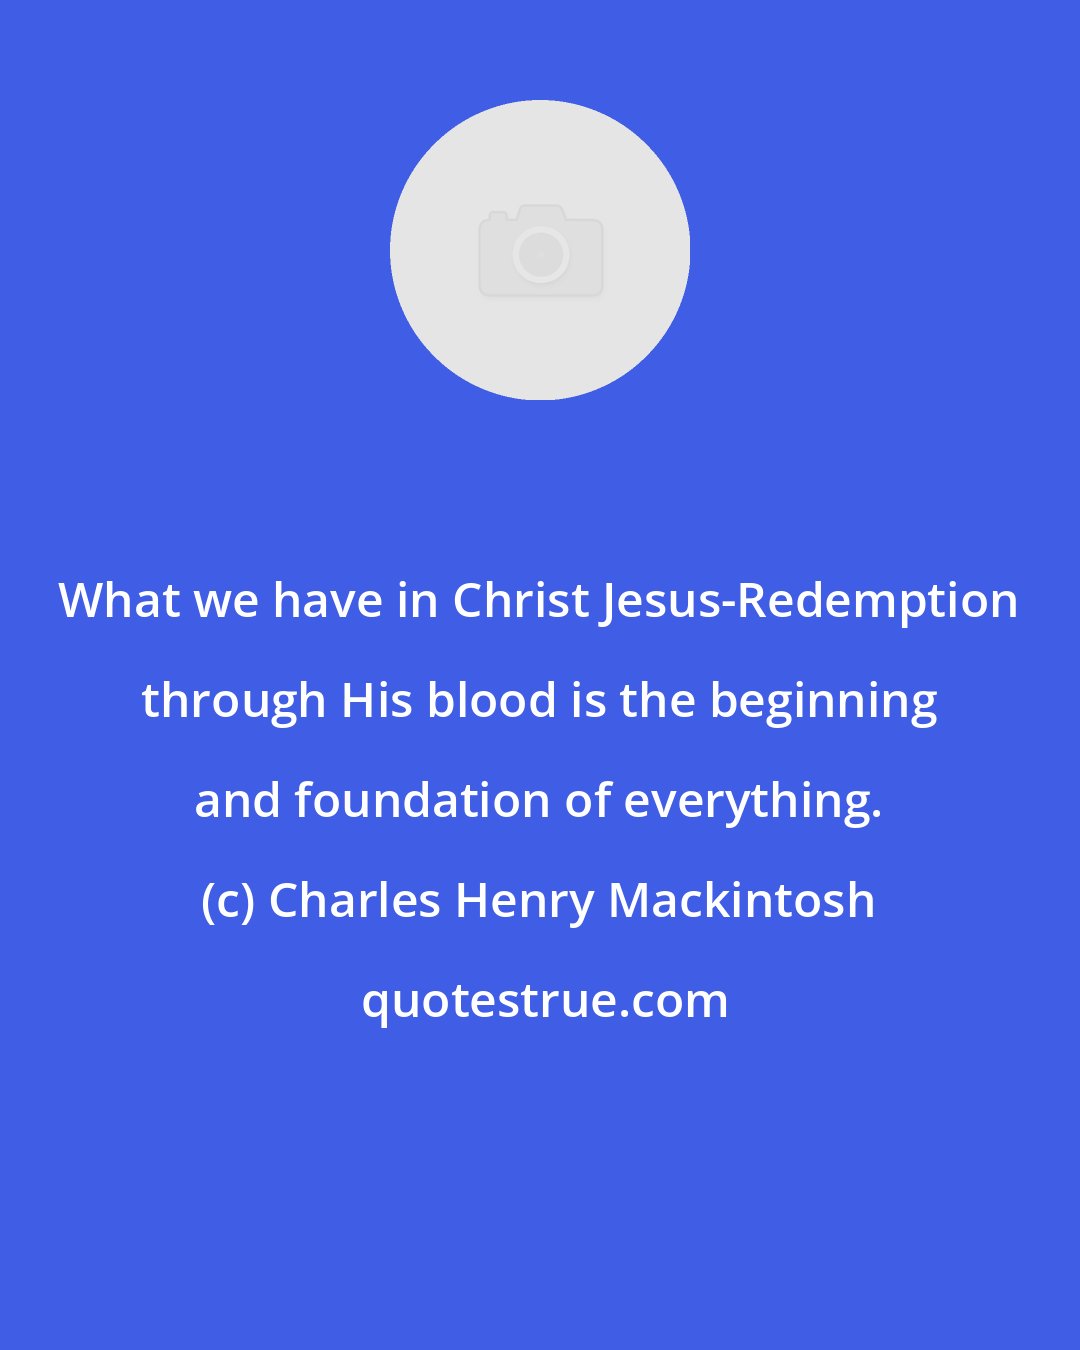 Charles Henry Mackintosh: What we have in Christ Jesus-Redemption through His blood is the beginning and foundation of everything.